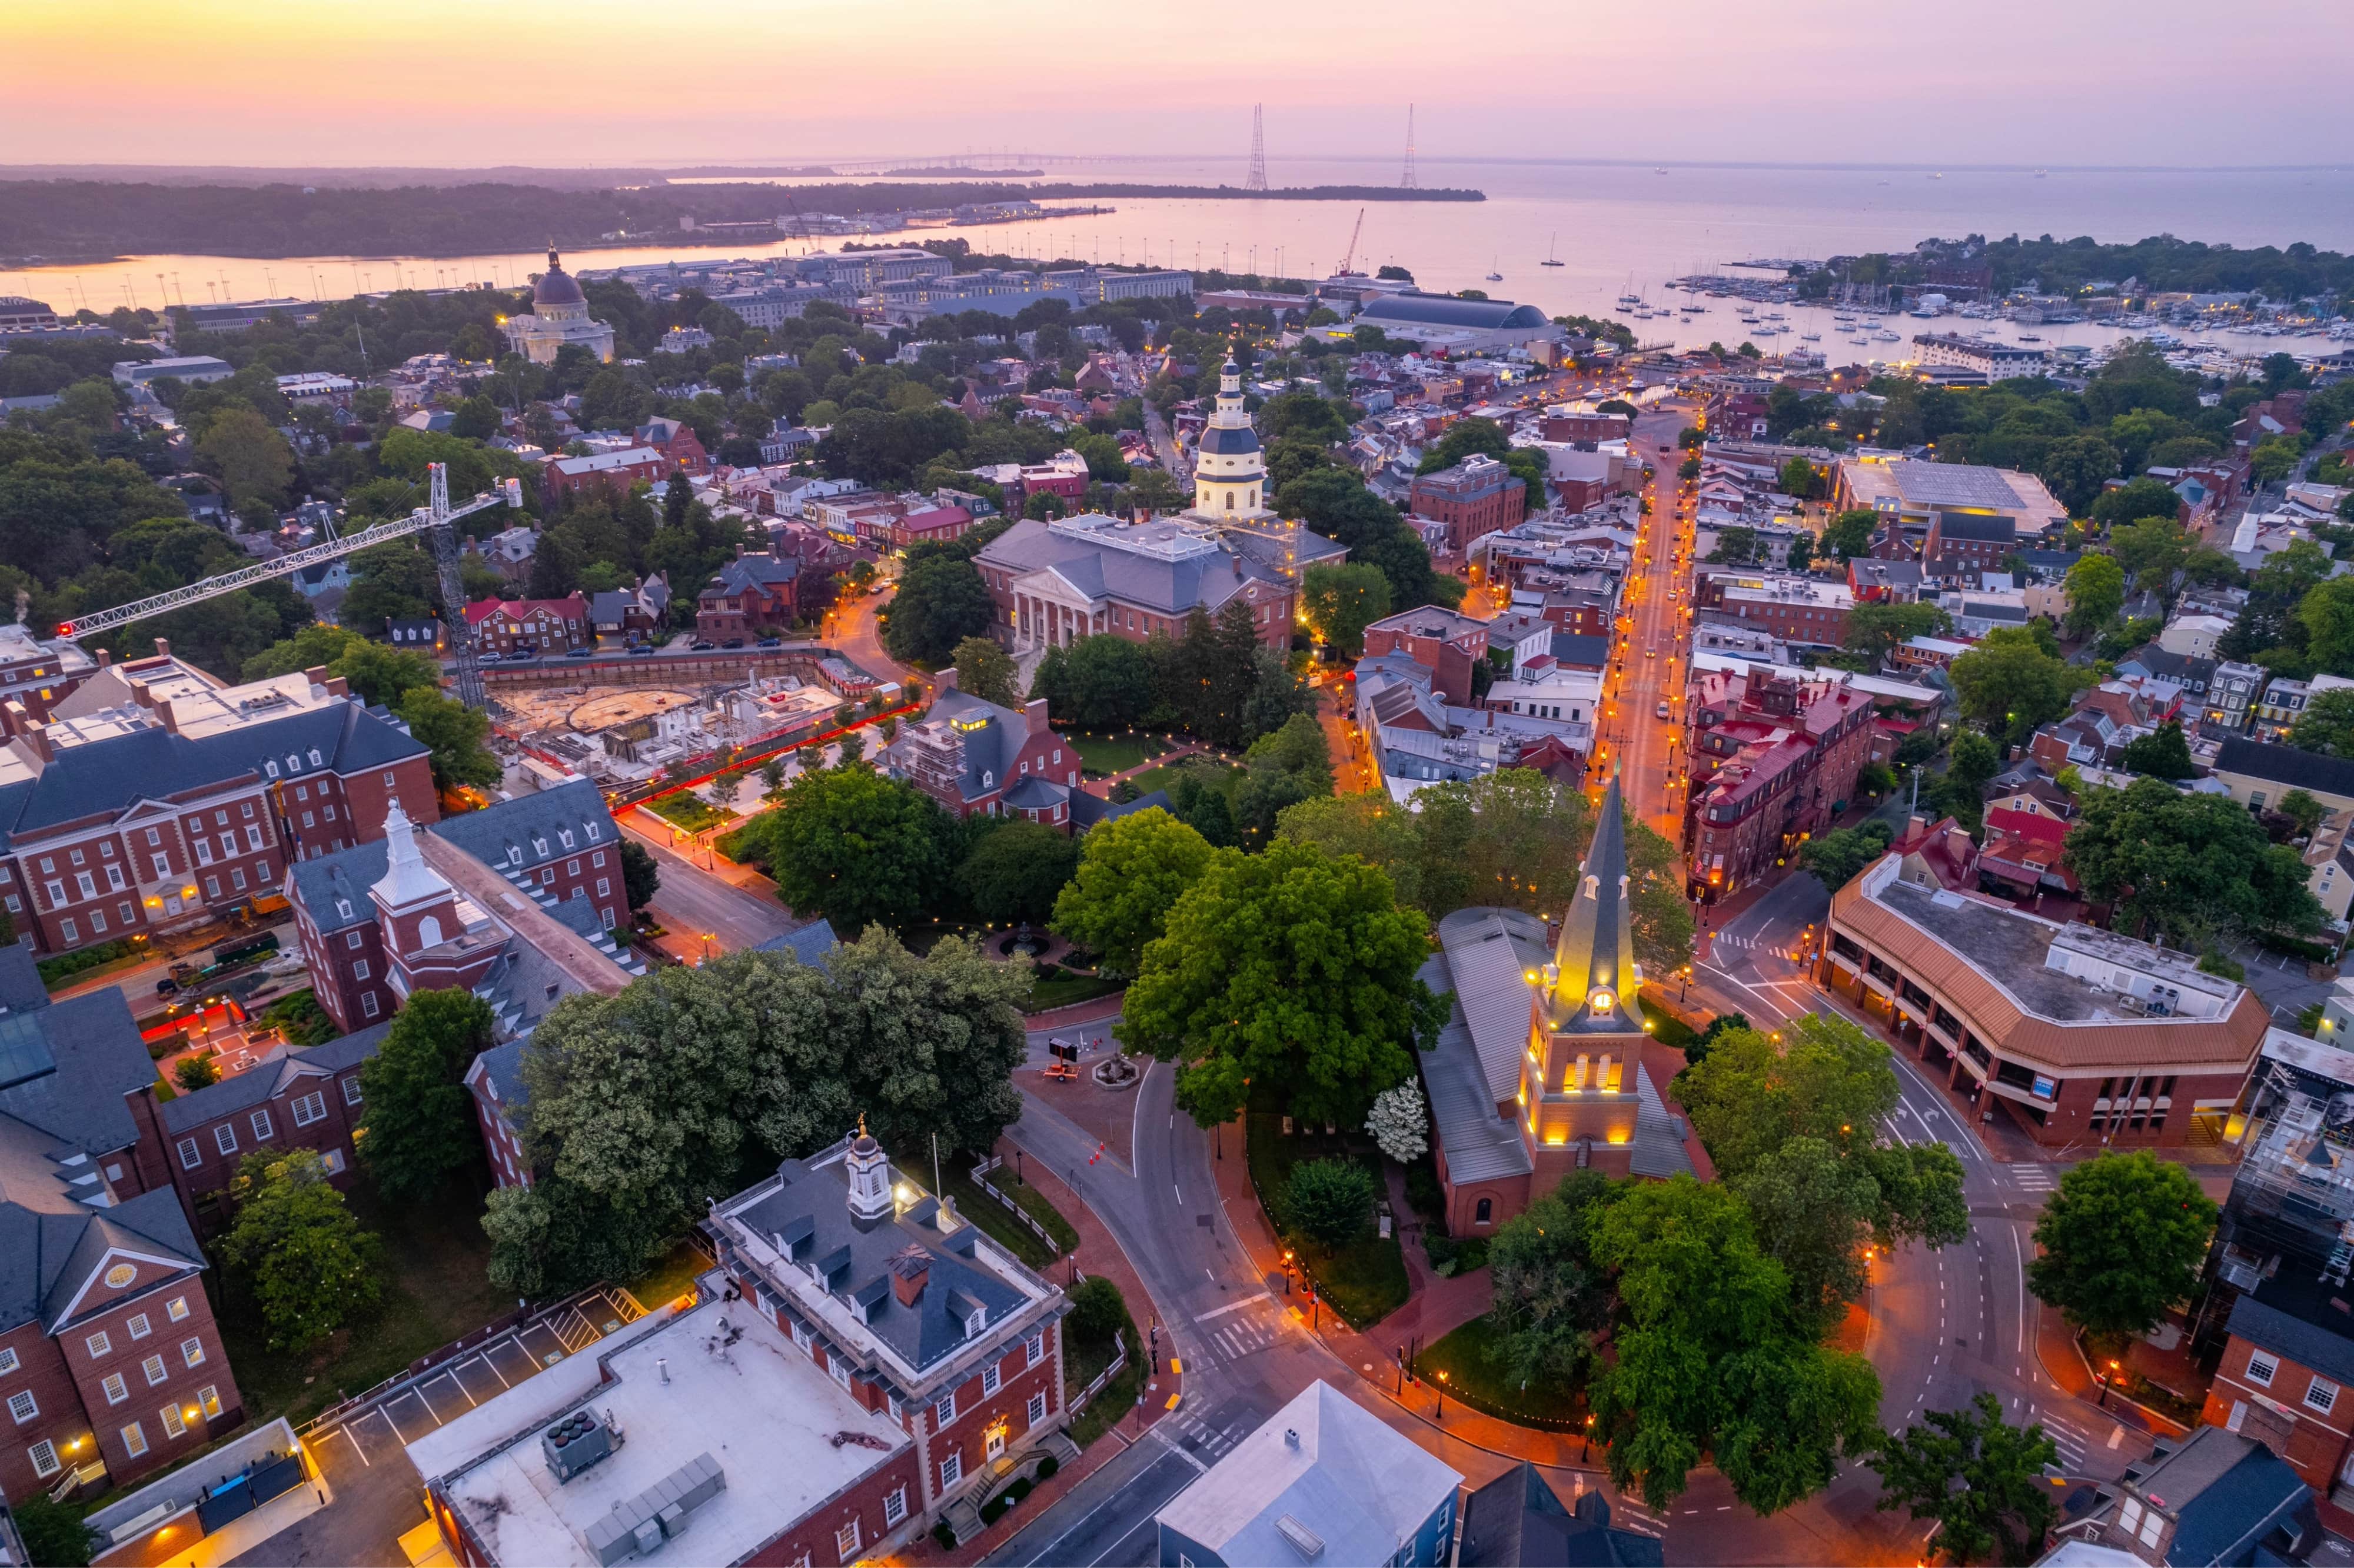 Aerial view of Chesapeake Bay of Annapolis, Maryland at sunrise